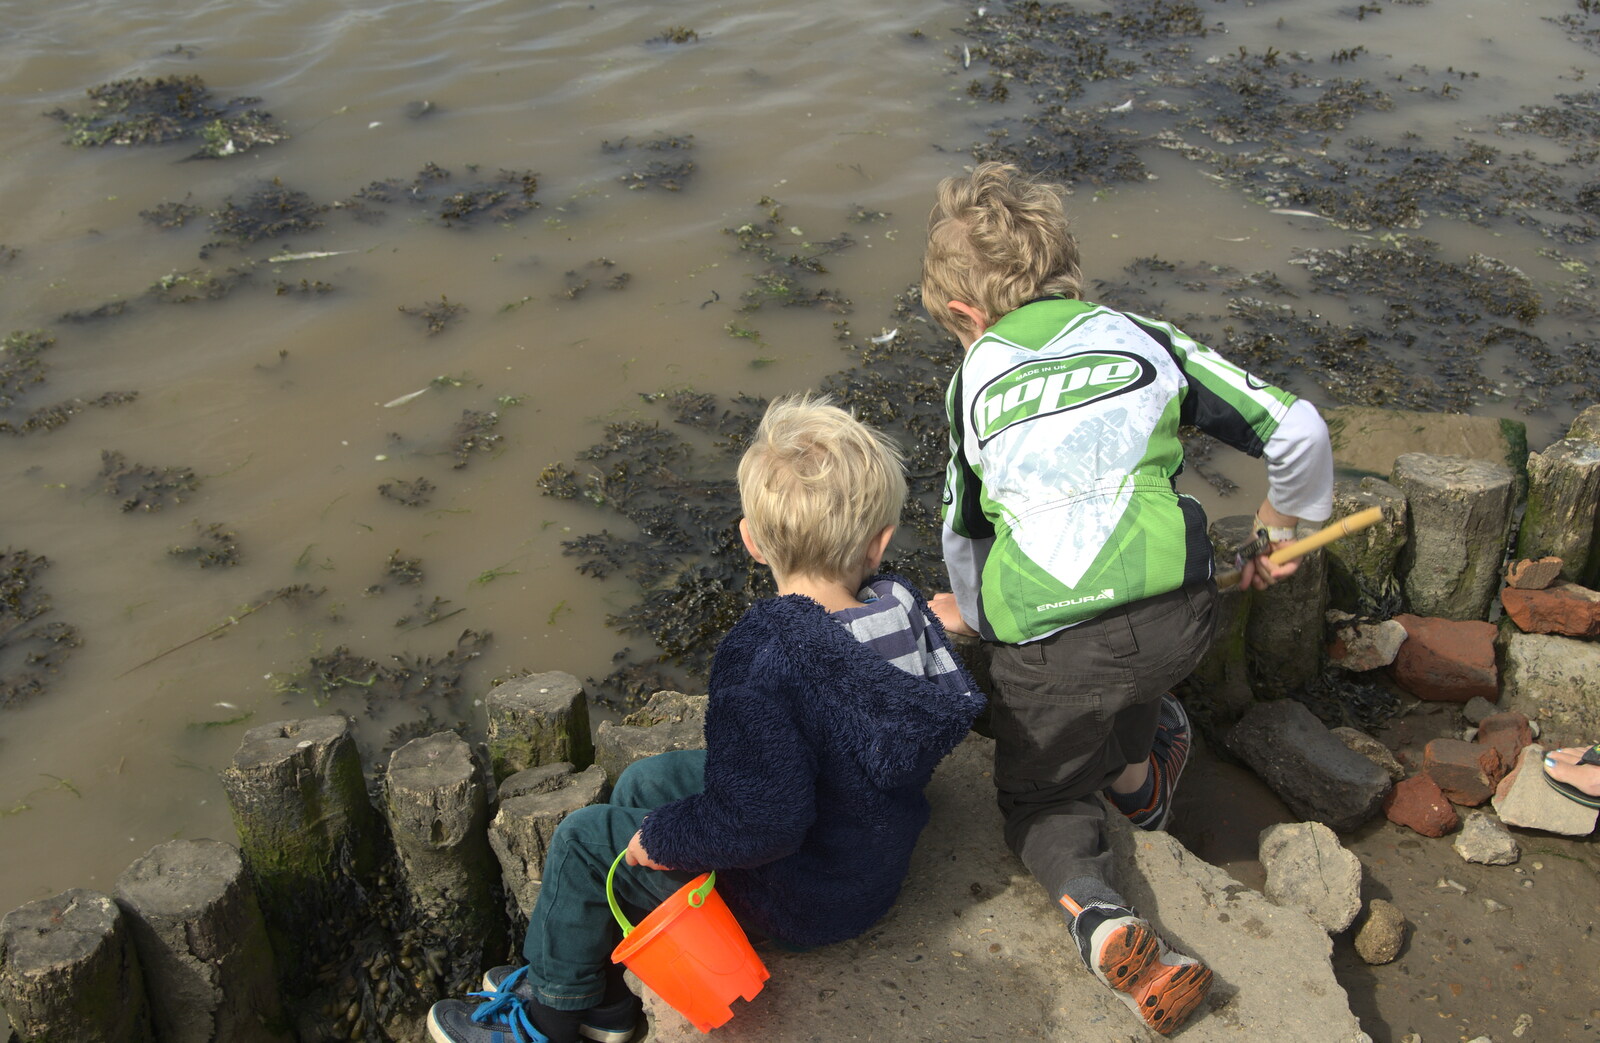 Harry and Fred inspect for crabs from The Danger of Trees: A Camping (Mis)adventure - Southwold, Suffolk - 3rd August 2015